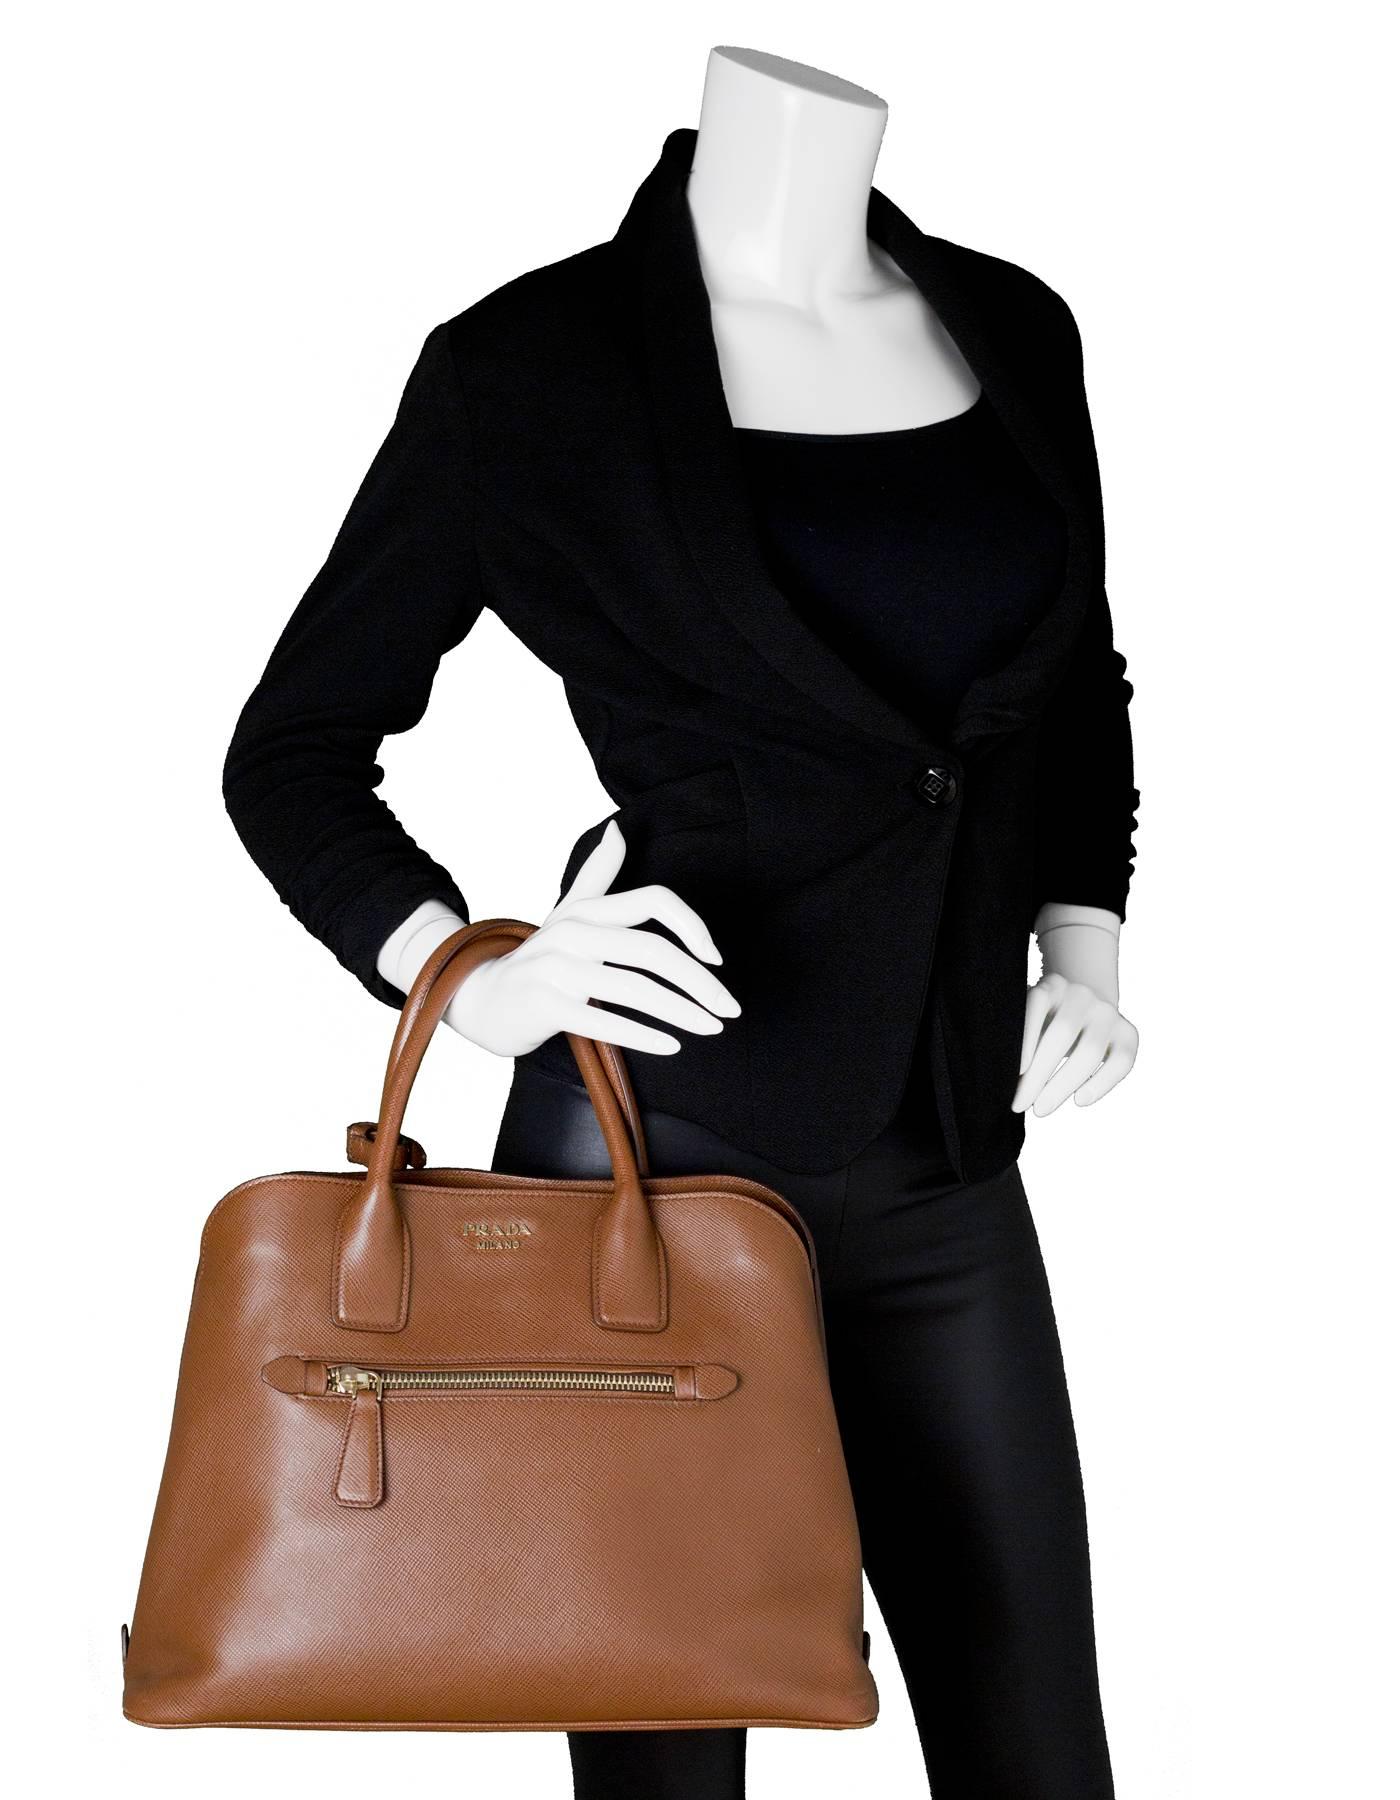 Prada Brown Saffiano Leather Palissandro Tote
Features optional shoulder strap

Made In: Italy
Color: Brown
Materials: Saffiano leather, metal
Lining: Brown leather
Closure/Opening: Open top with center snap
Exterior Pockets: Front zip